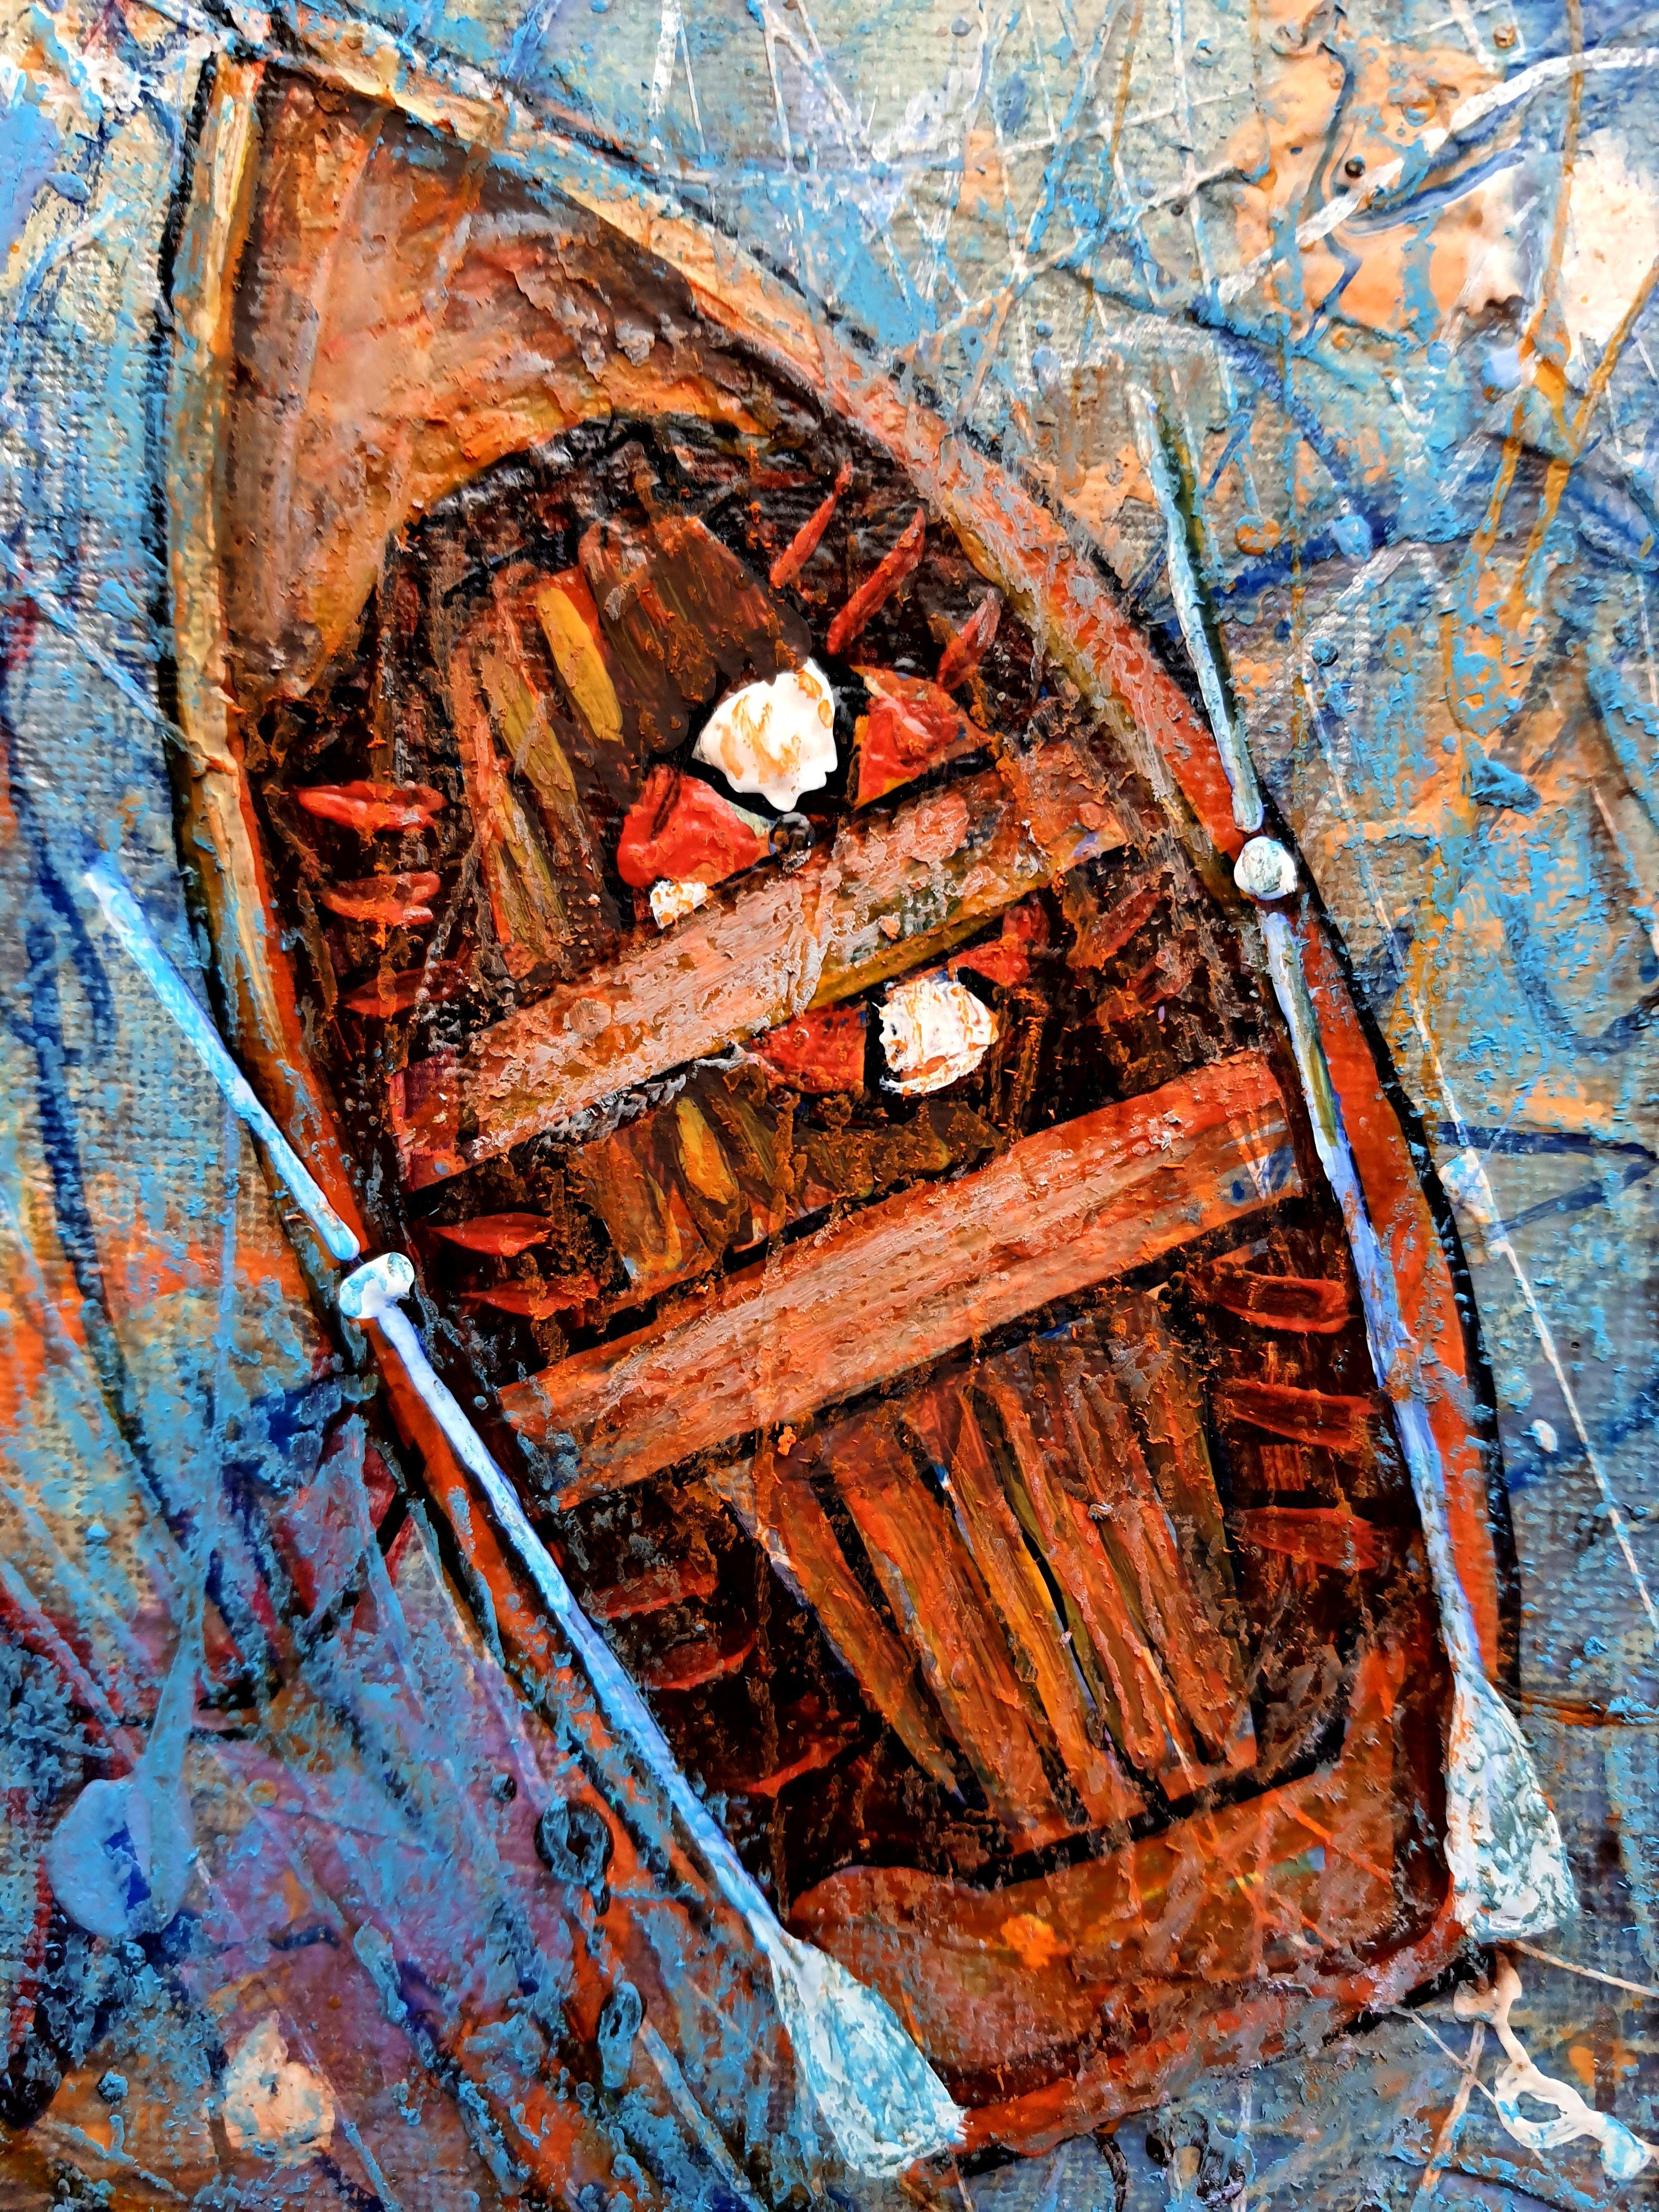 In this painting, I've poured my soul into capturing the raw emotion and movement of the water, cradling the vibrant boats that seem to dance upon its surface. The materials - acrylic, oil, and oil pastel - blend in a symphony of texture and depth.